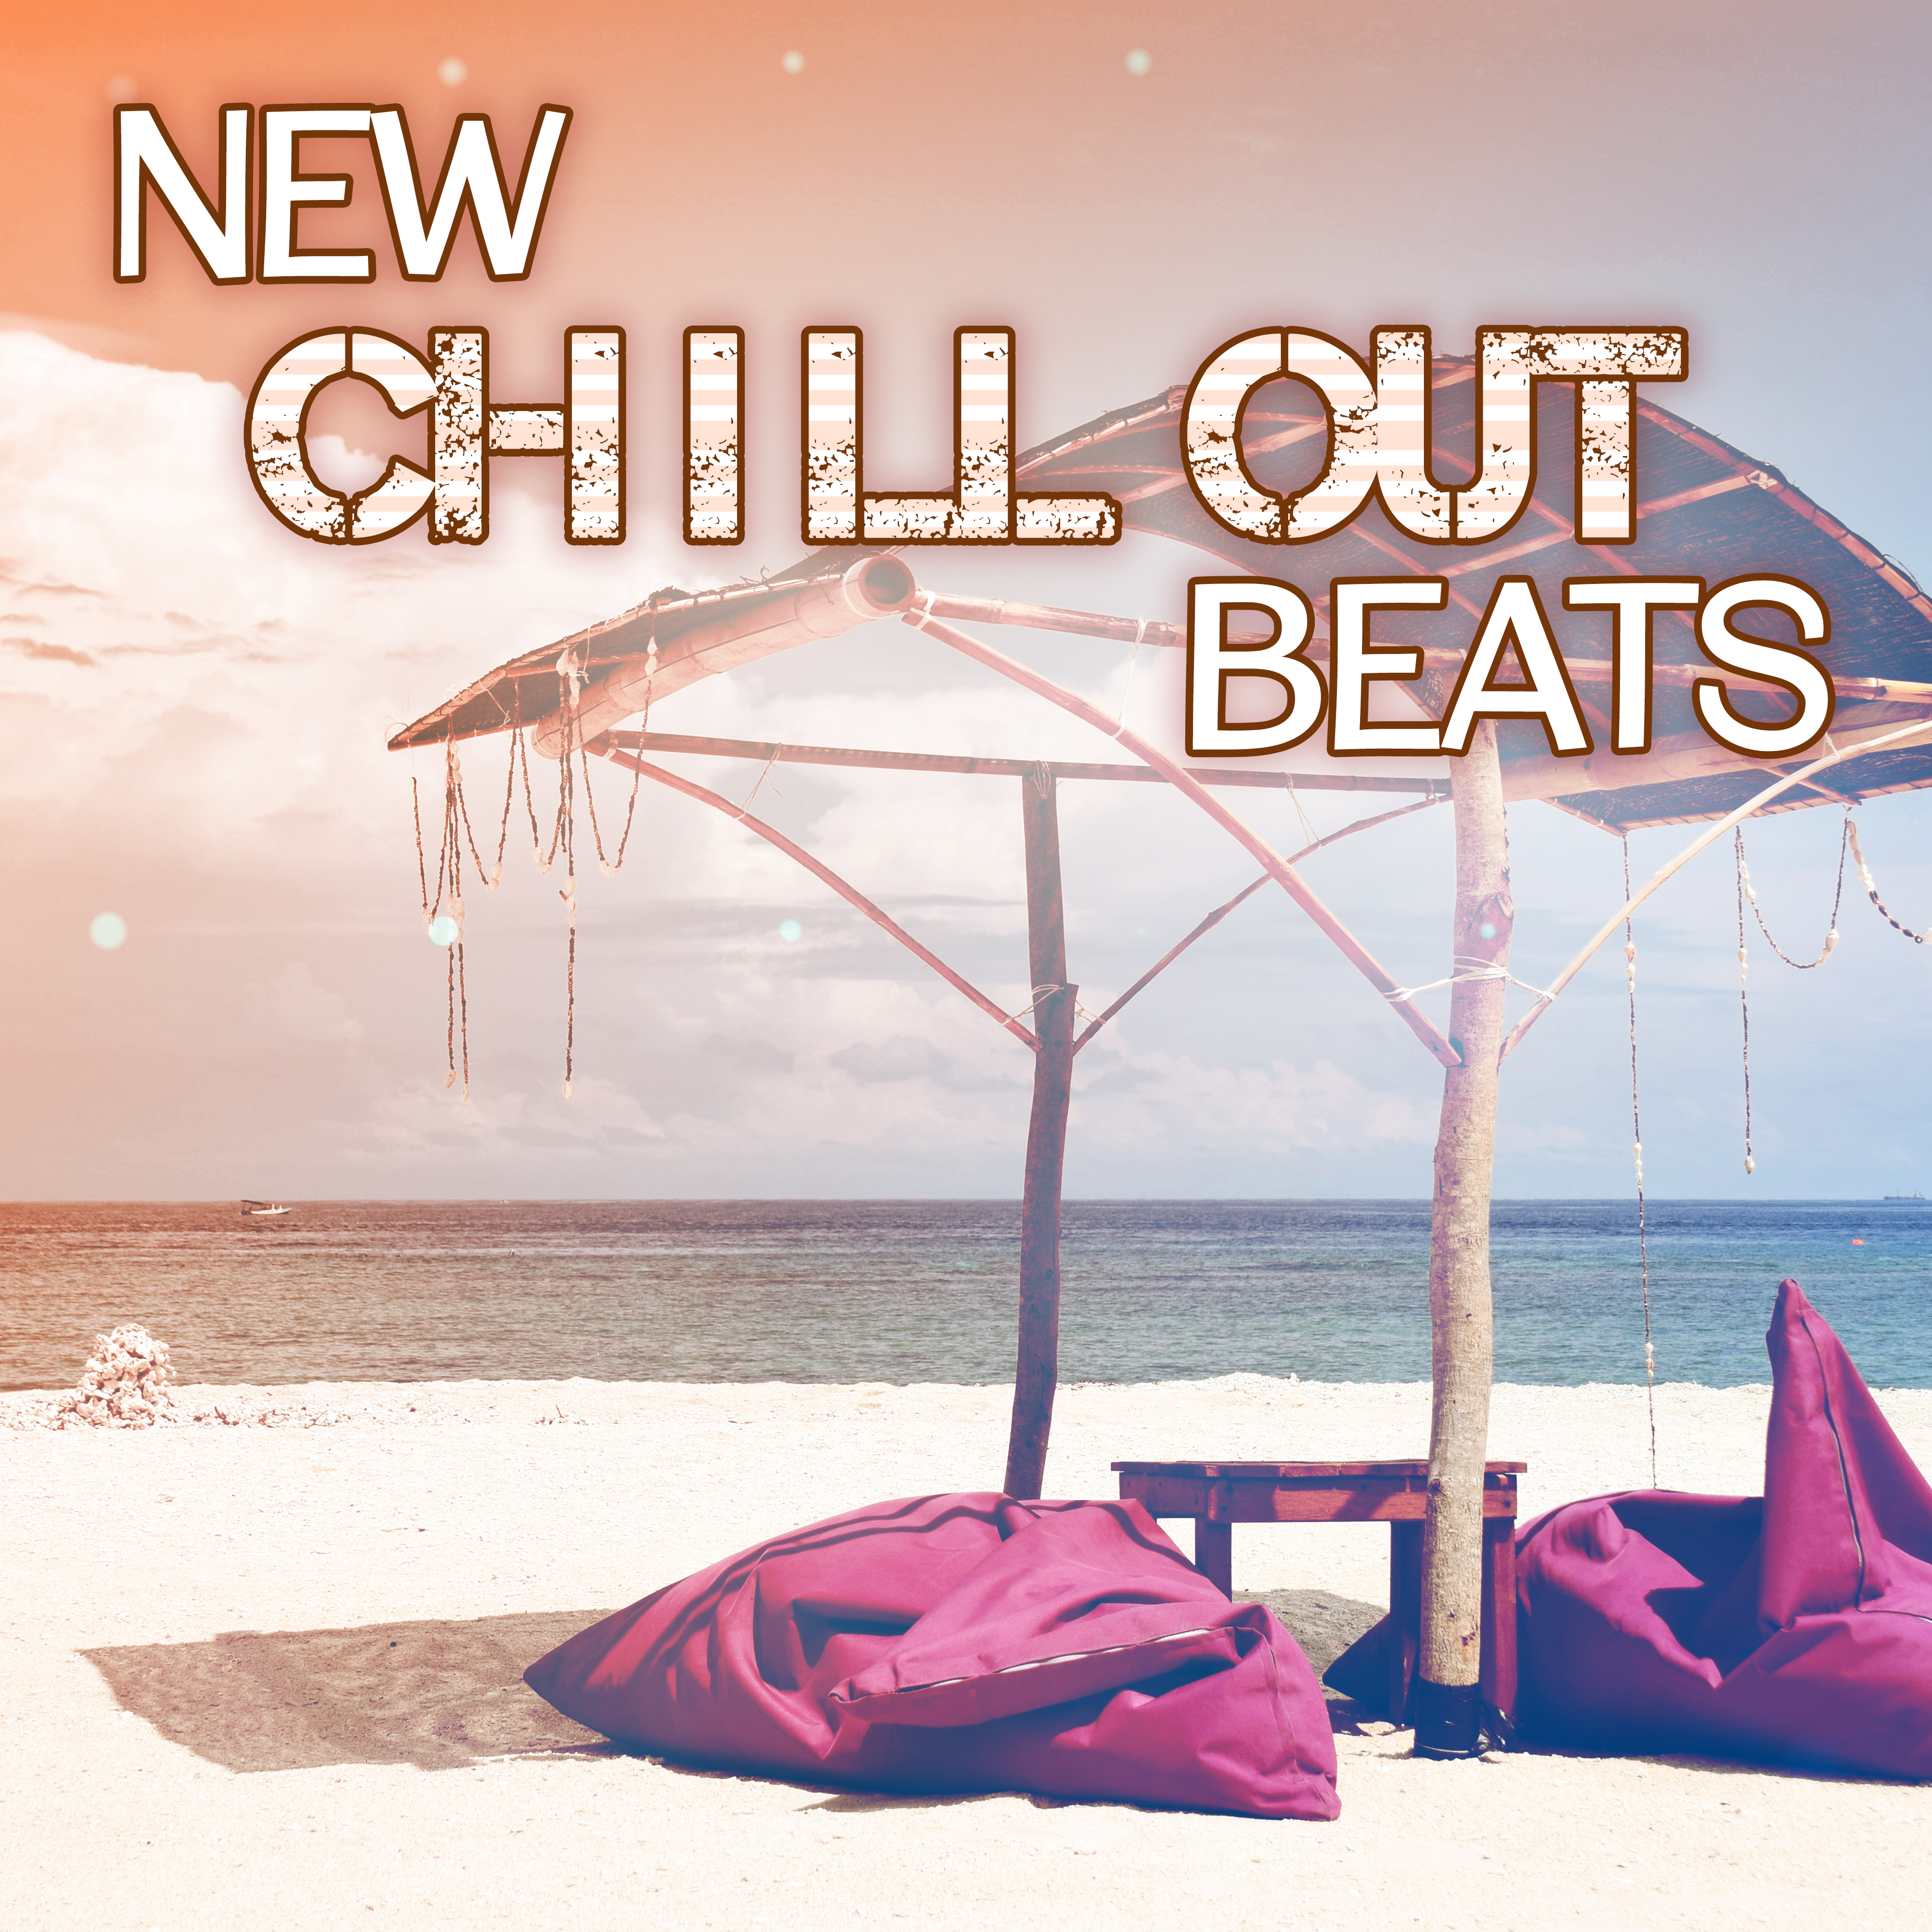 New Chill Out Beats  - Electronic Beats of Chill Out Music, Deep Chill Out, Just Relax, Summer Memories